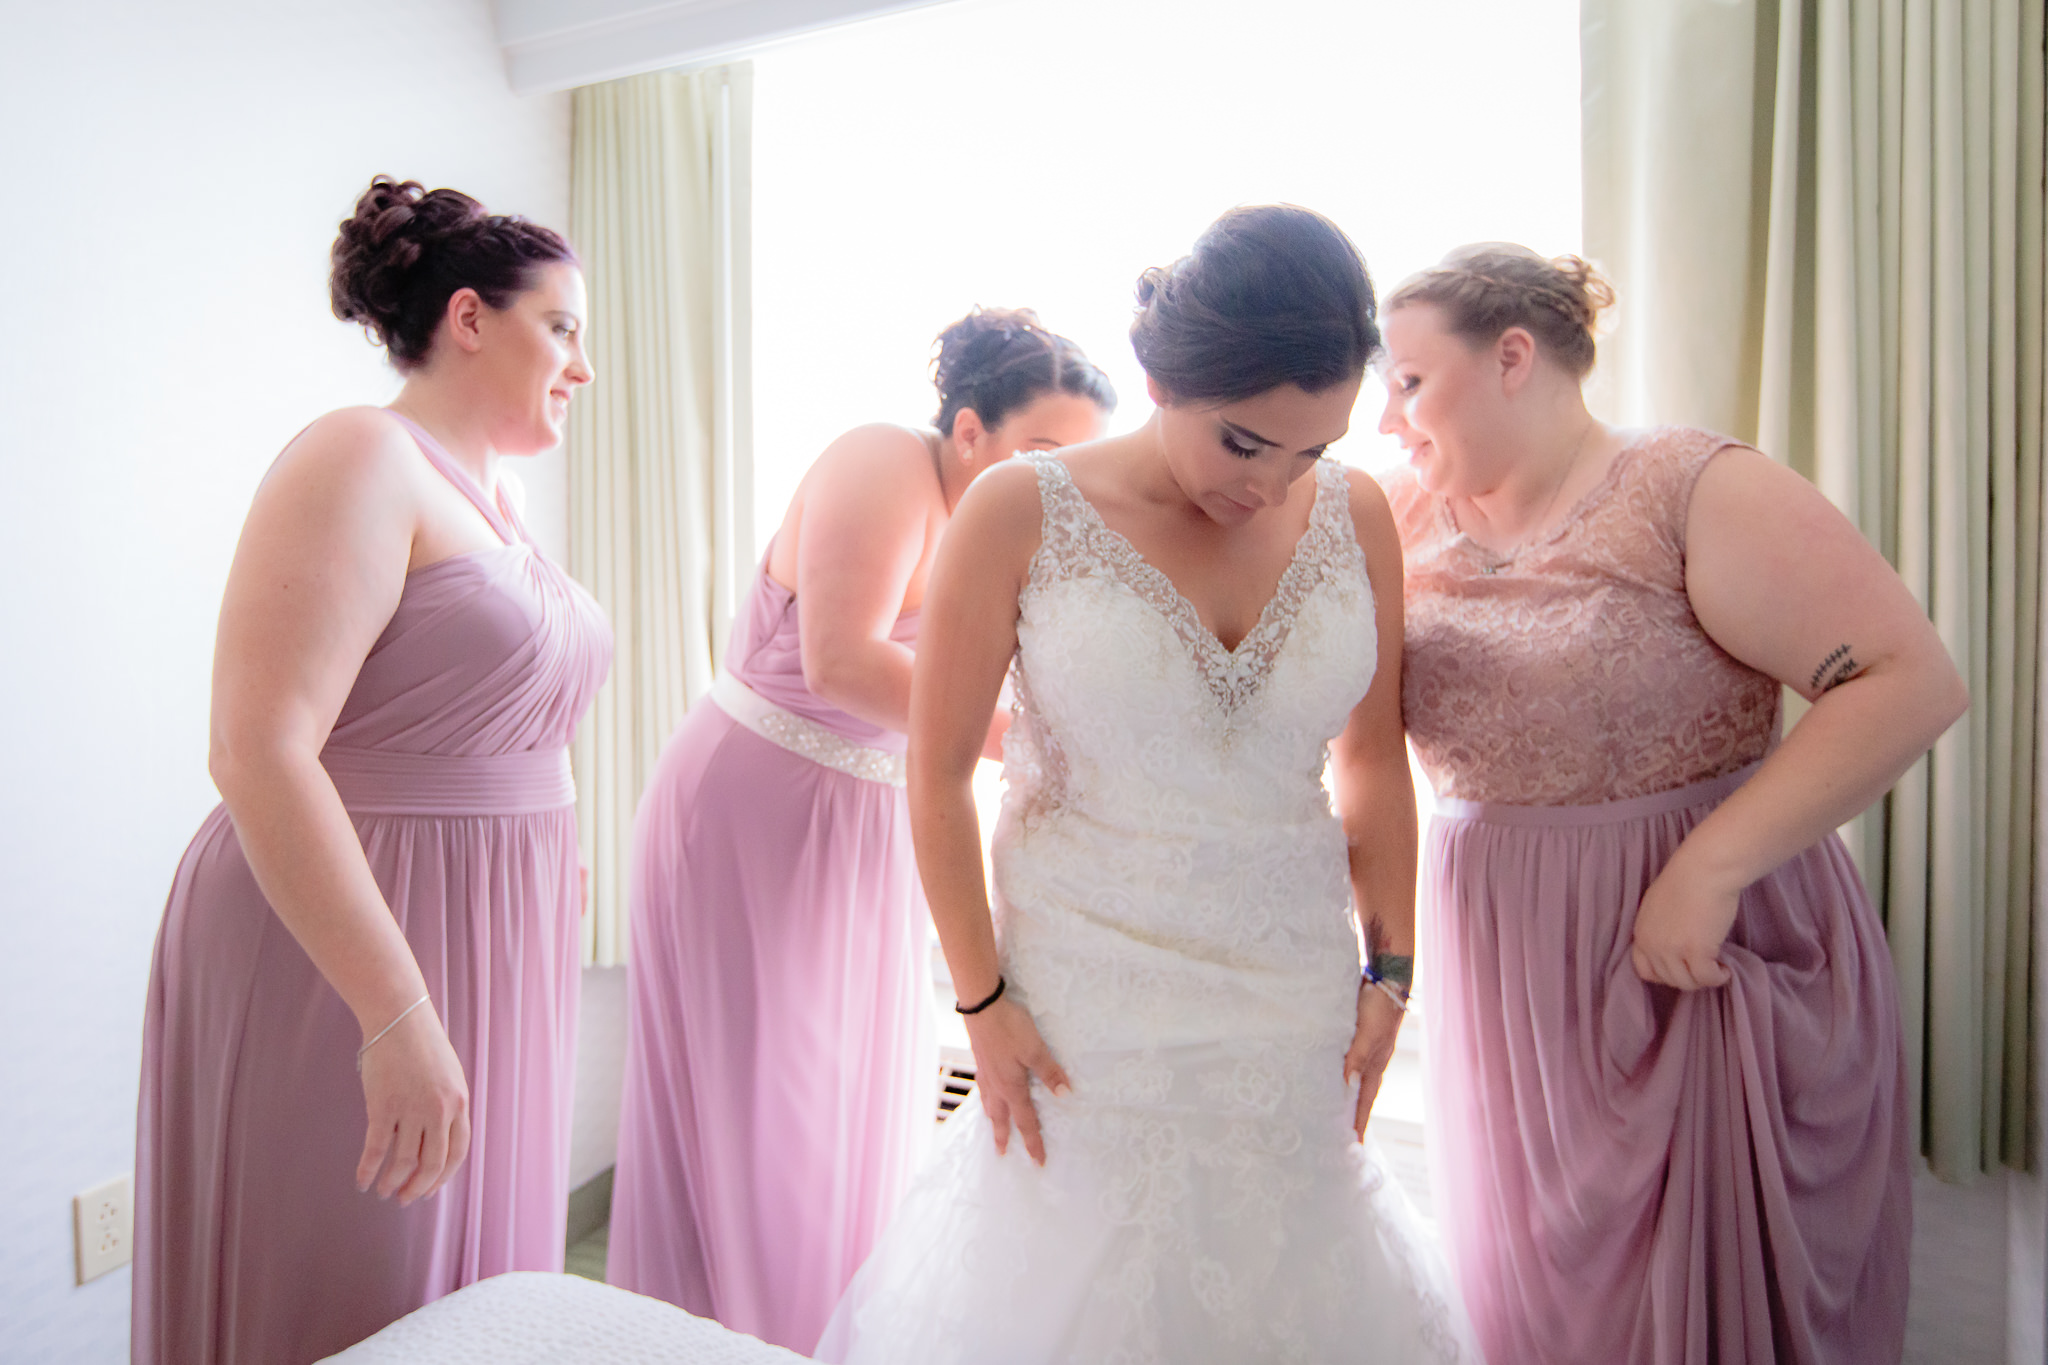 Bridesmaids help the bride into her wedding dress before a National Aviary wedding